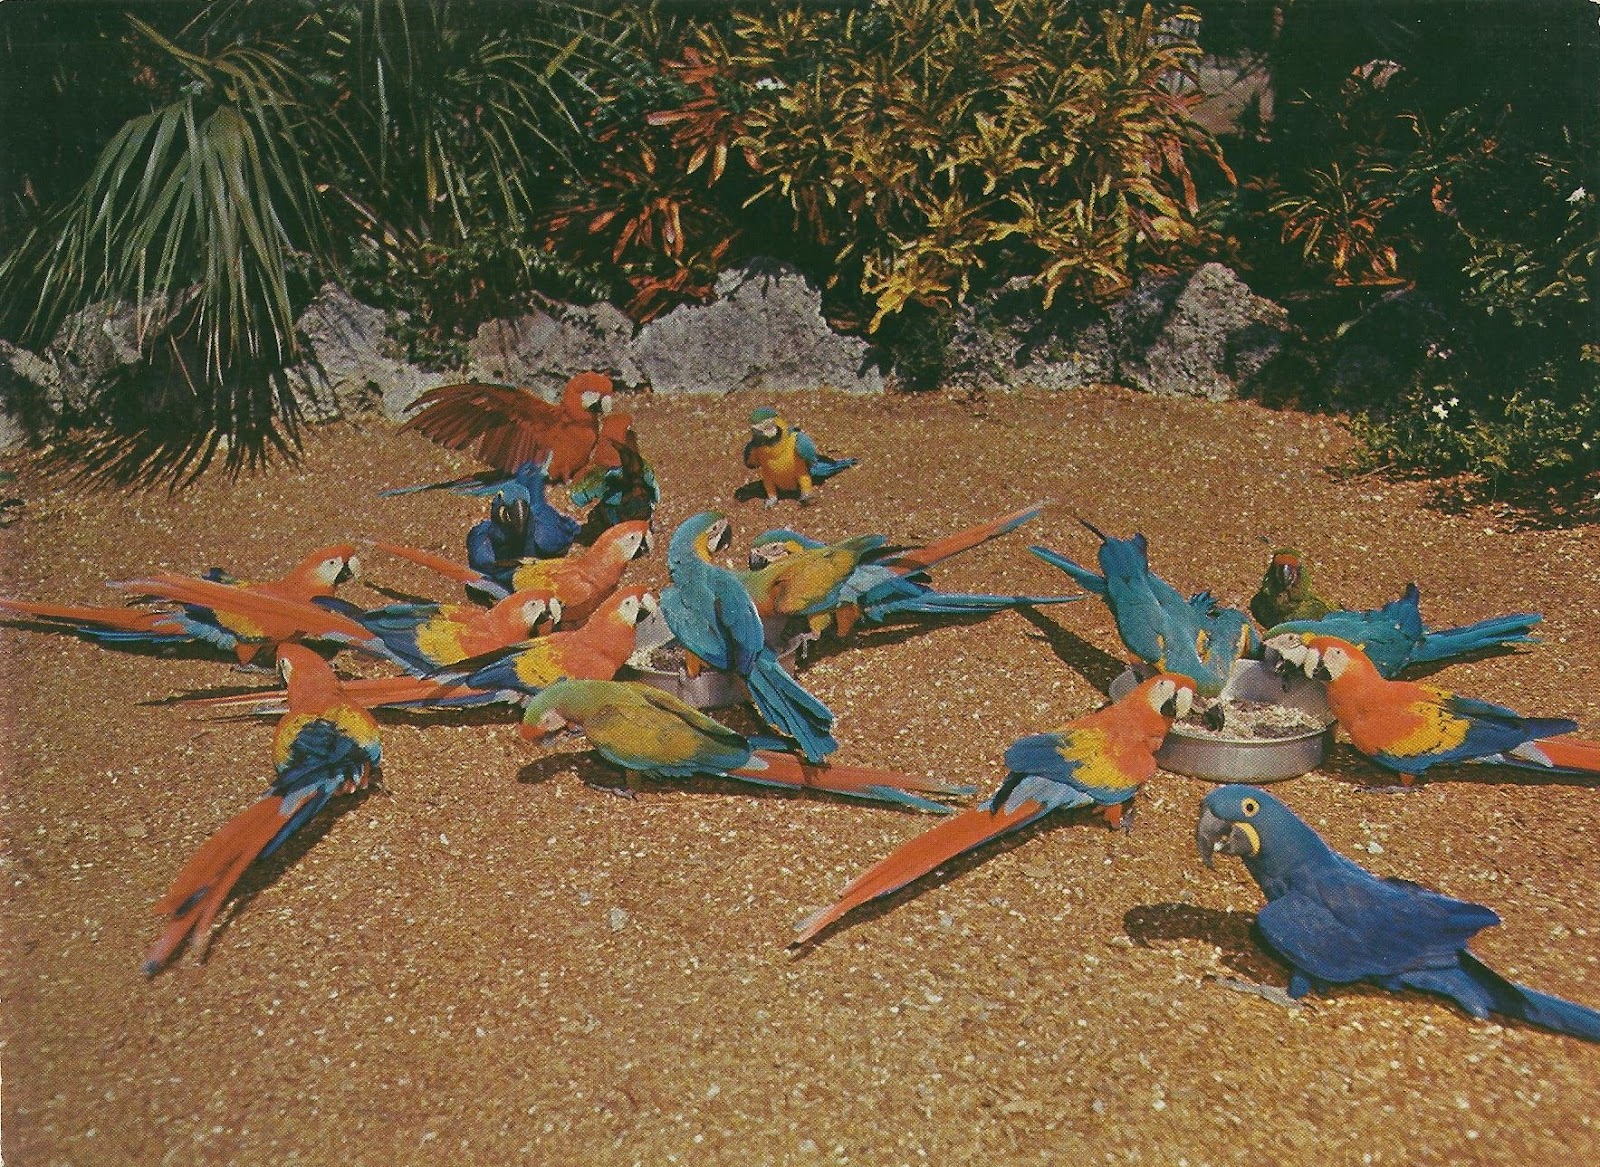 Download this Parrot Jungle Miami Florida picture